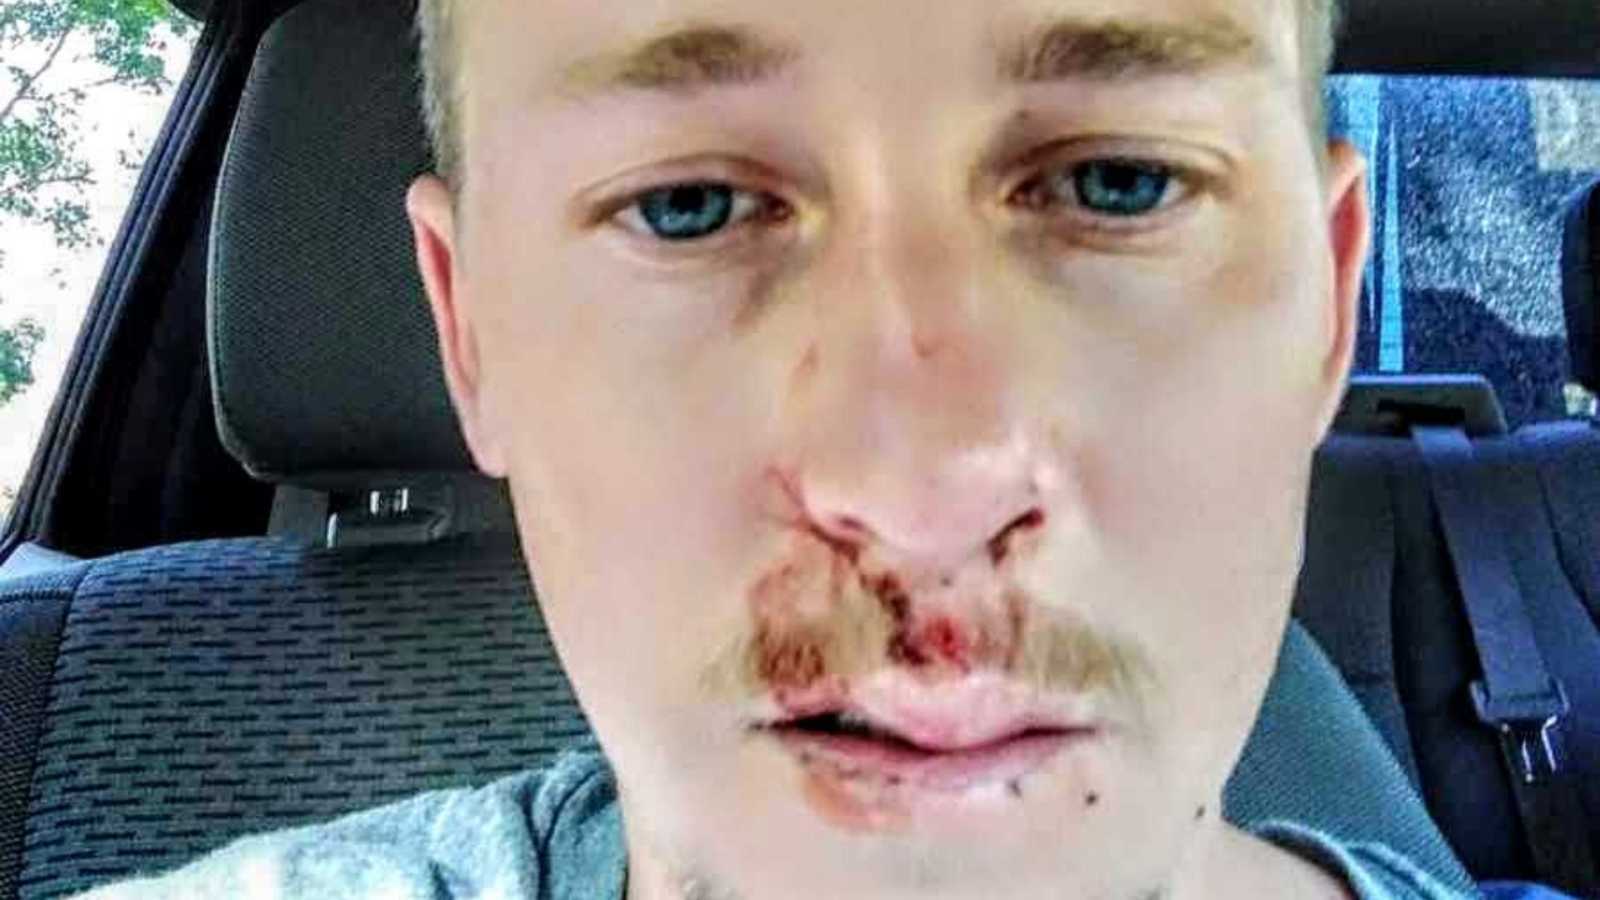 man takes selfie in car with face injury after going into bodily shock from cold water